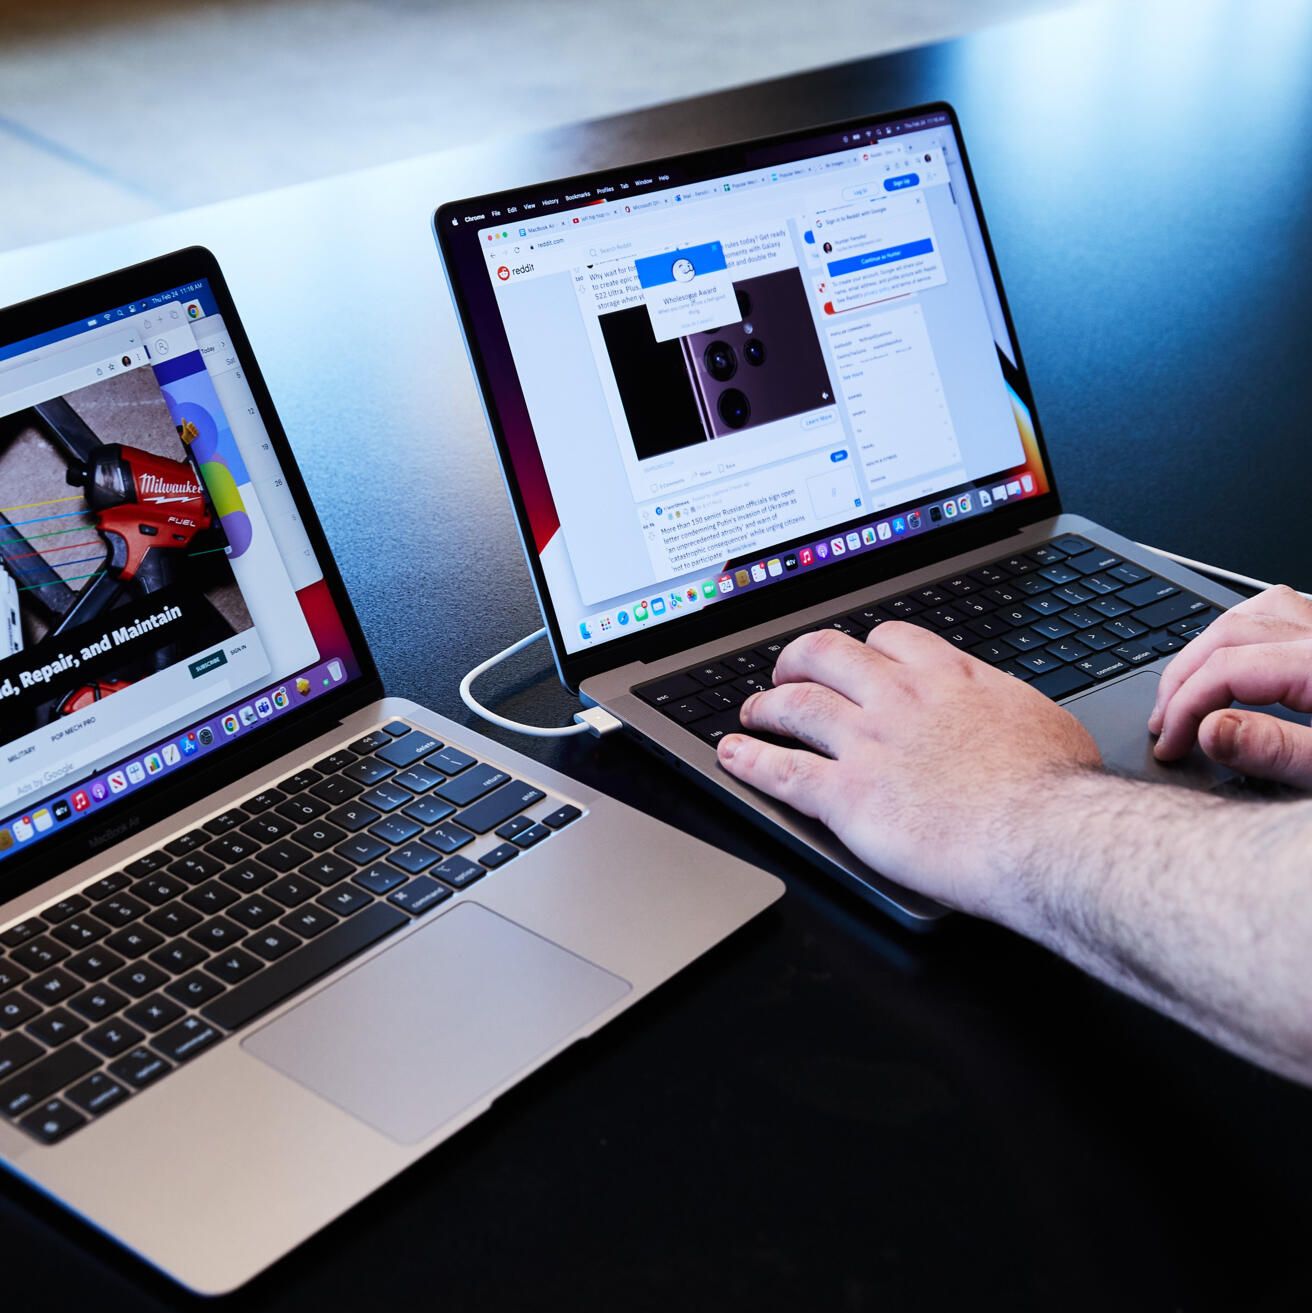 MacBook Air Vs. MacBook Pro: Which Is Best For You Based On Our Testing